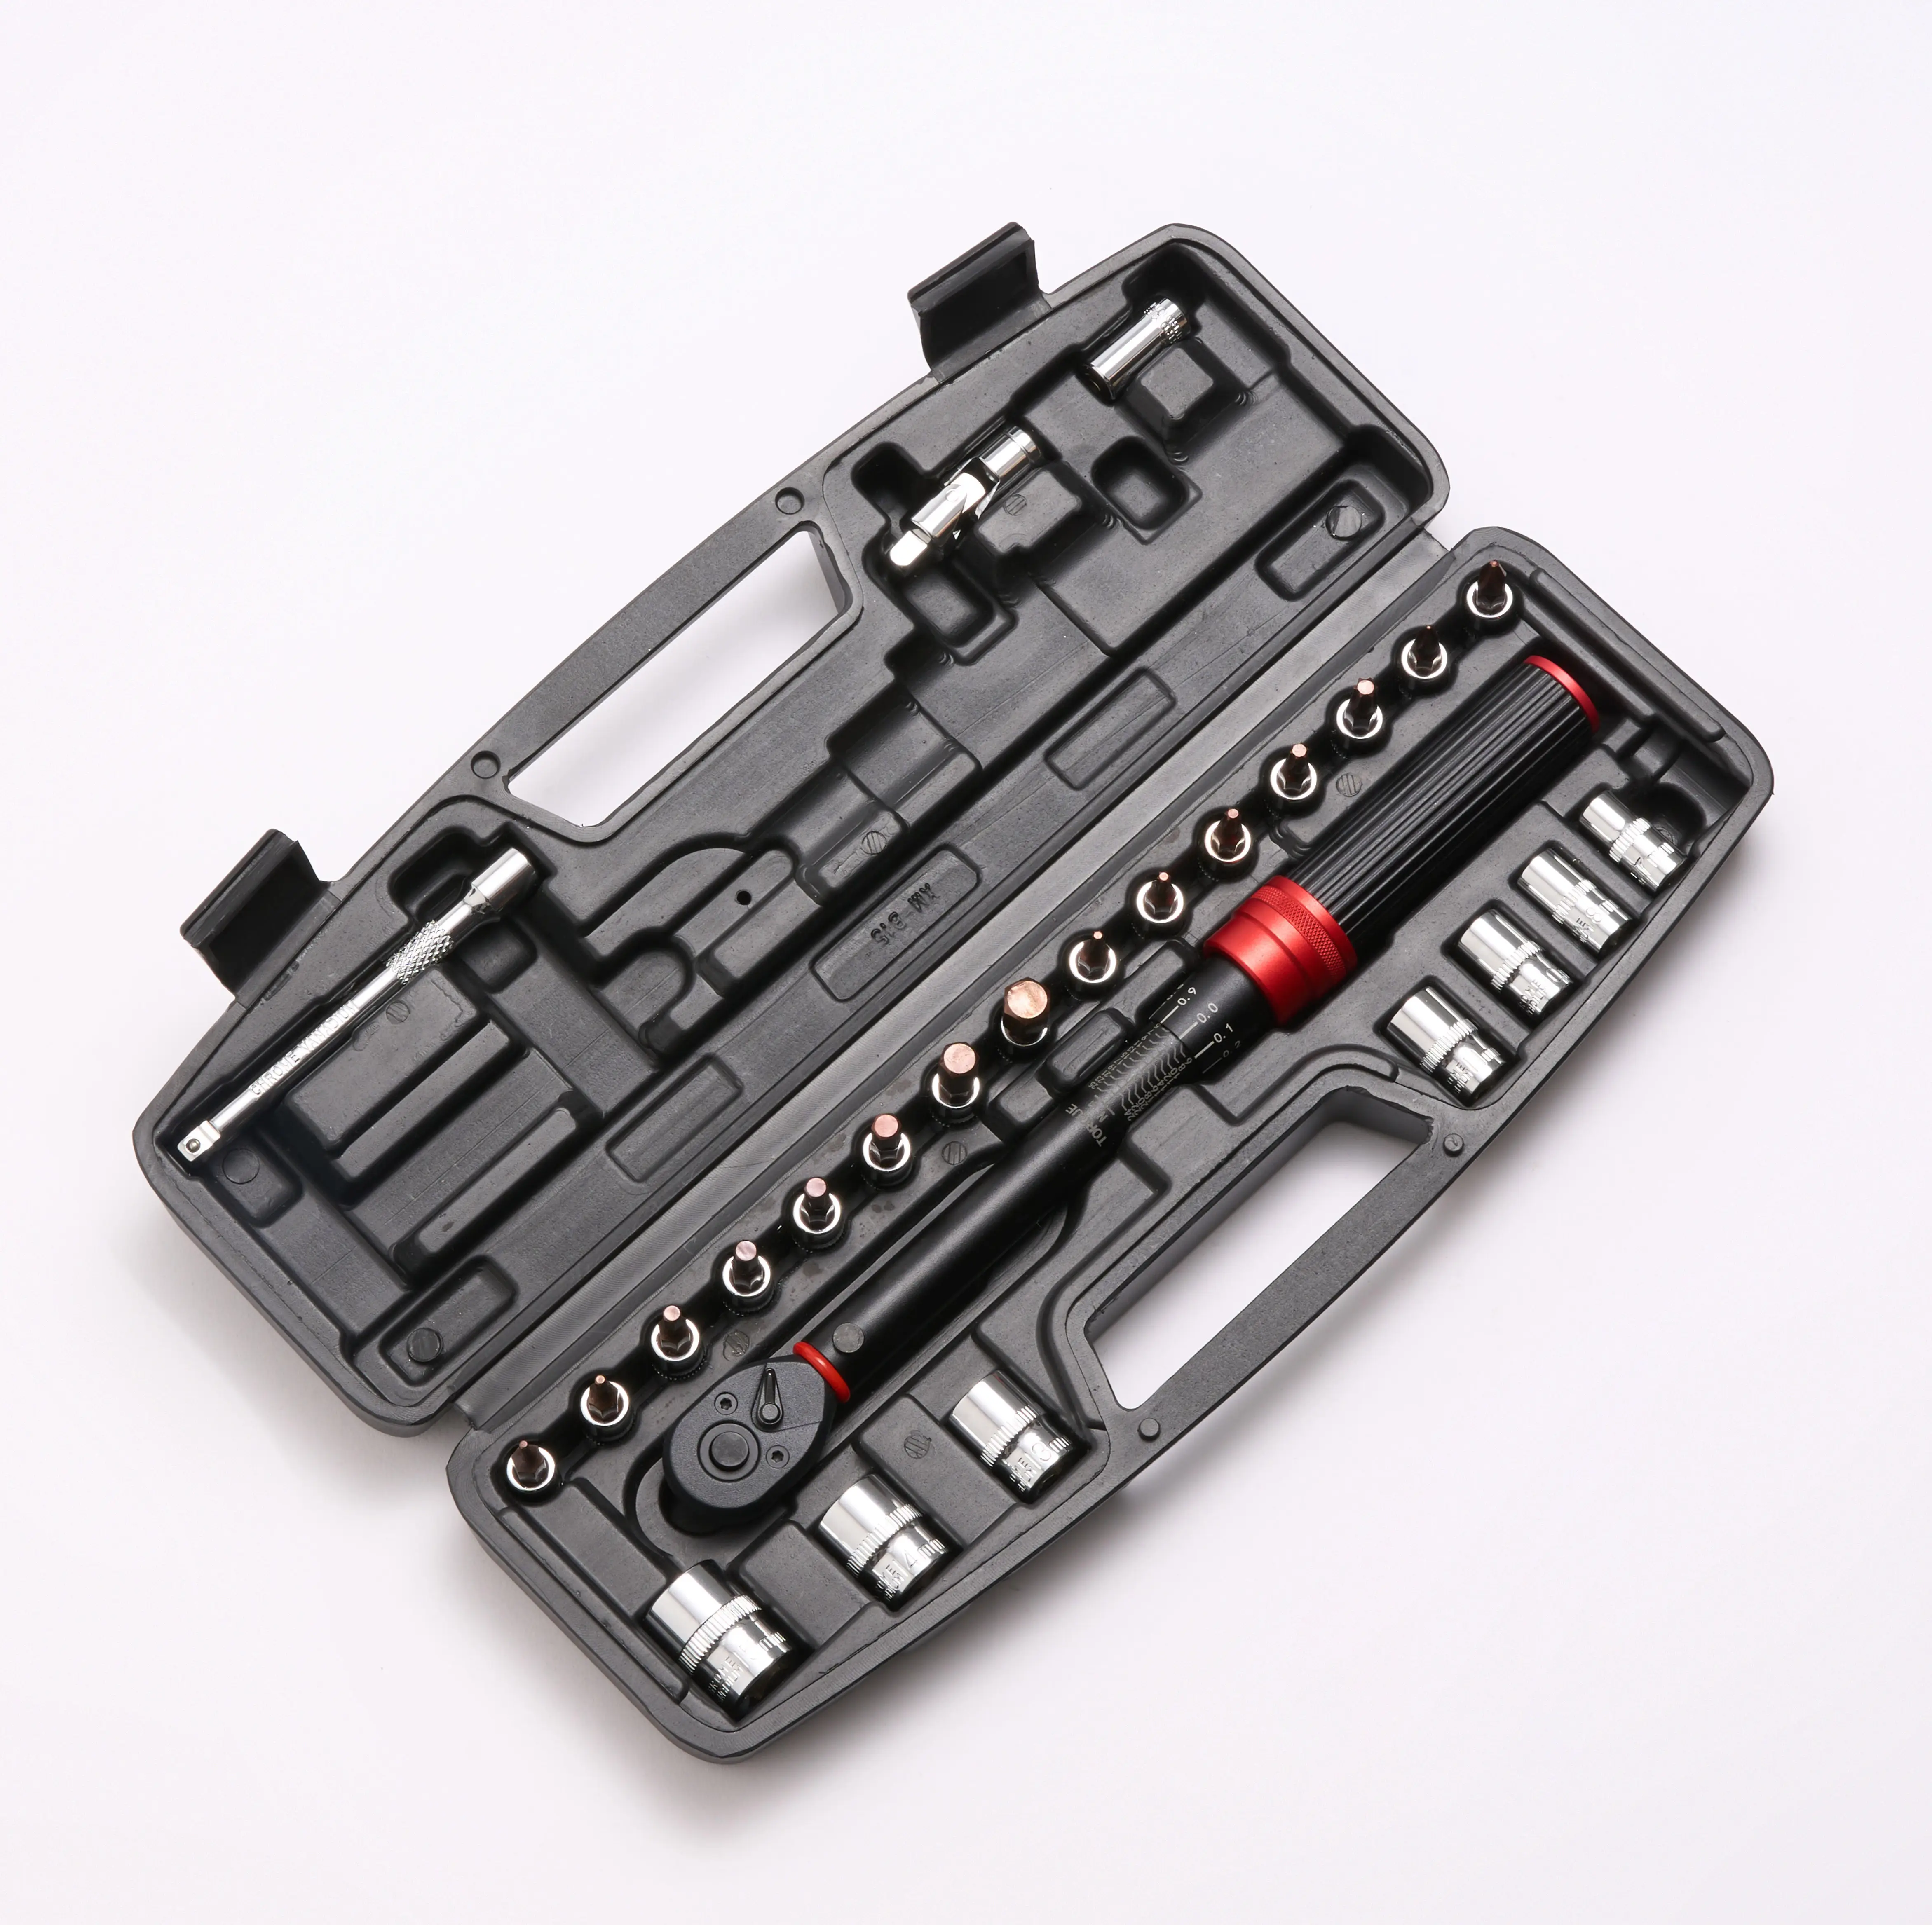 Hot selling socket wrench set torque wrench sets of hand tools universal socket spanner set